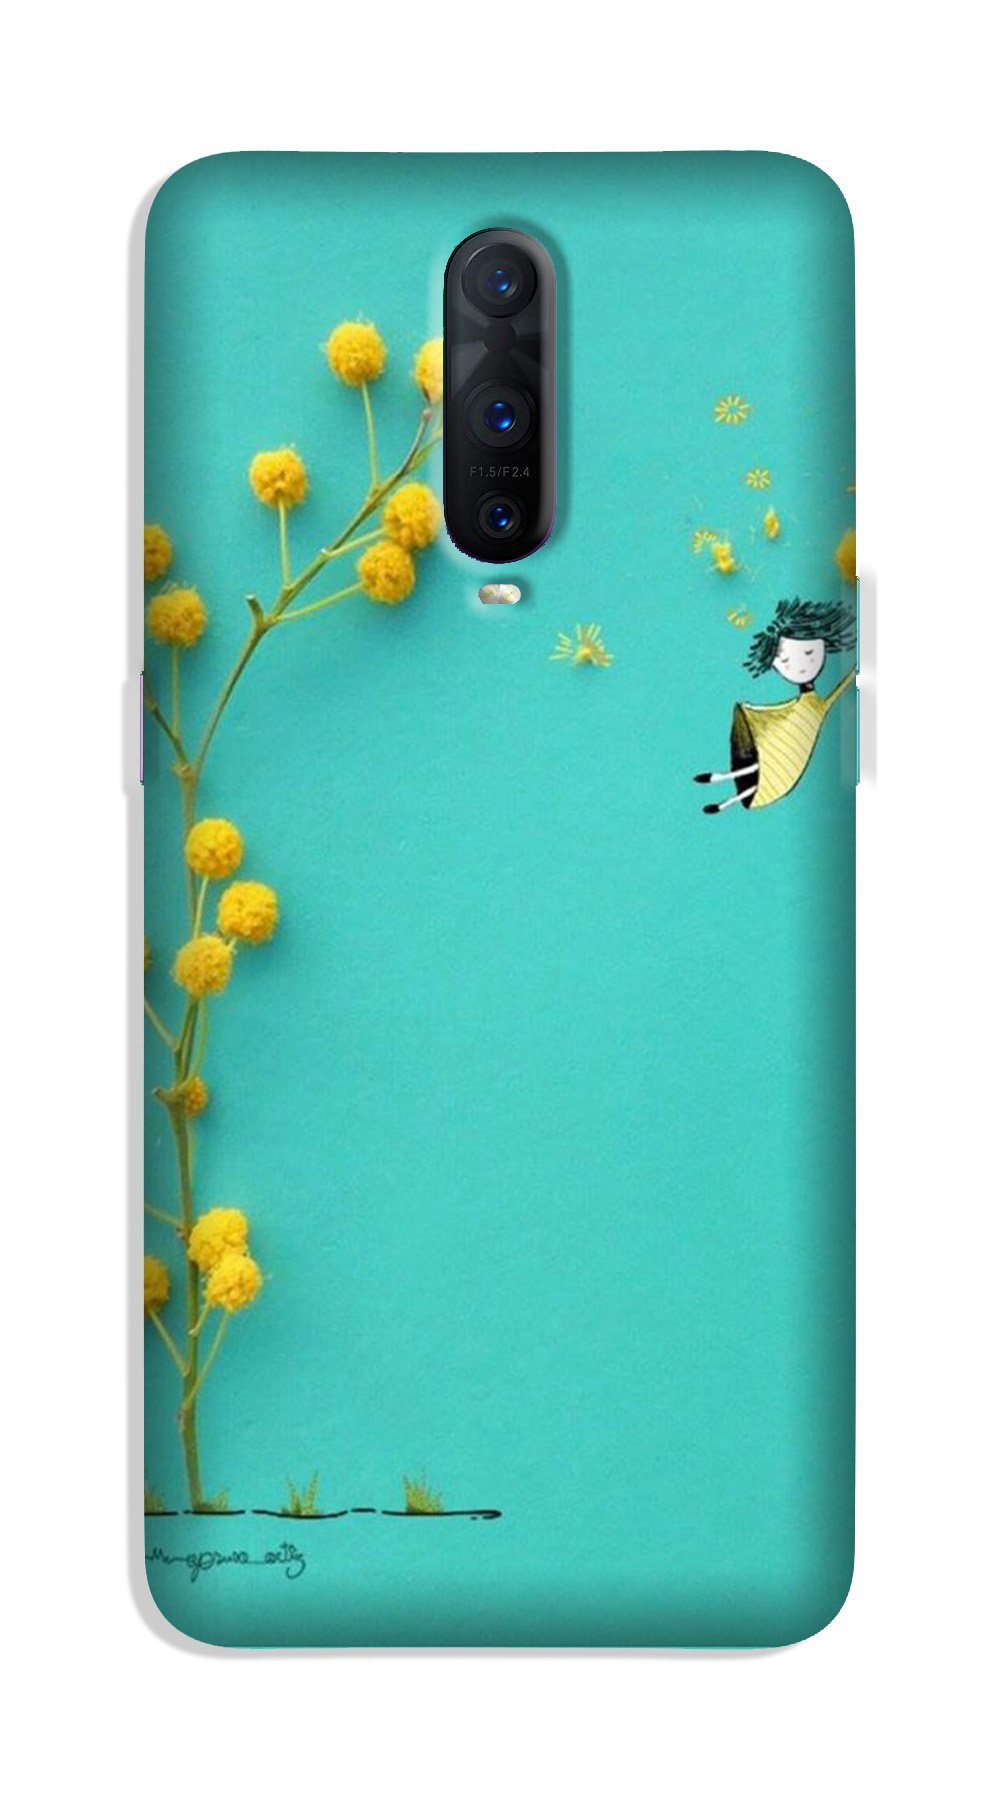 Flowers Girl Case for OnePlus 7 Pro (Design No. 216)